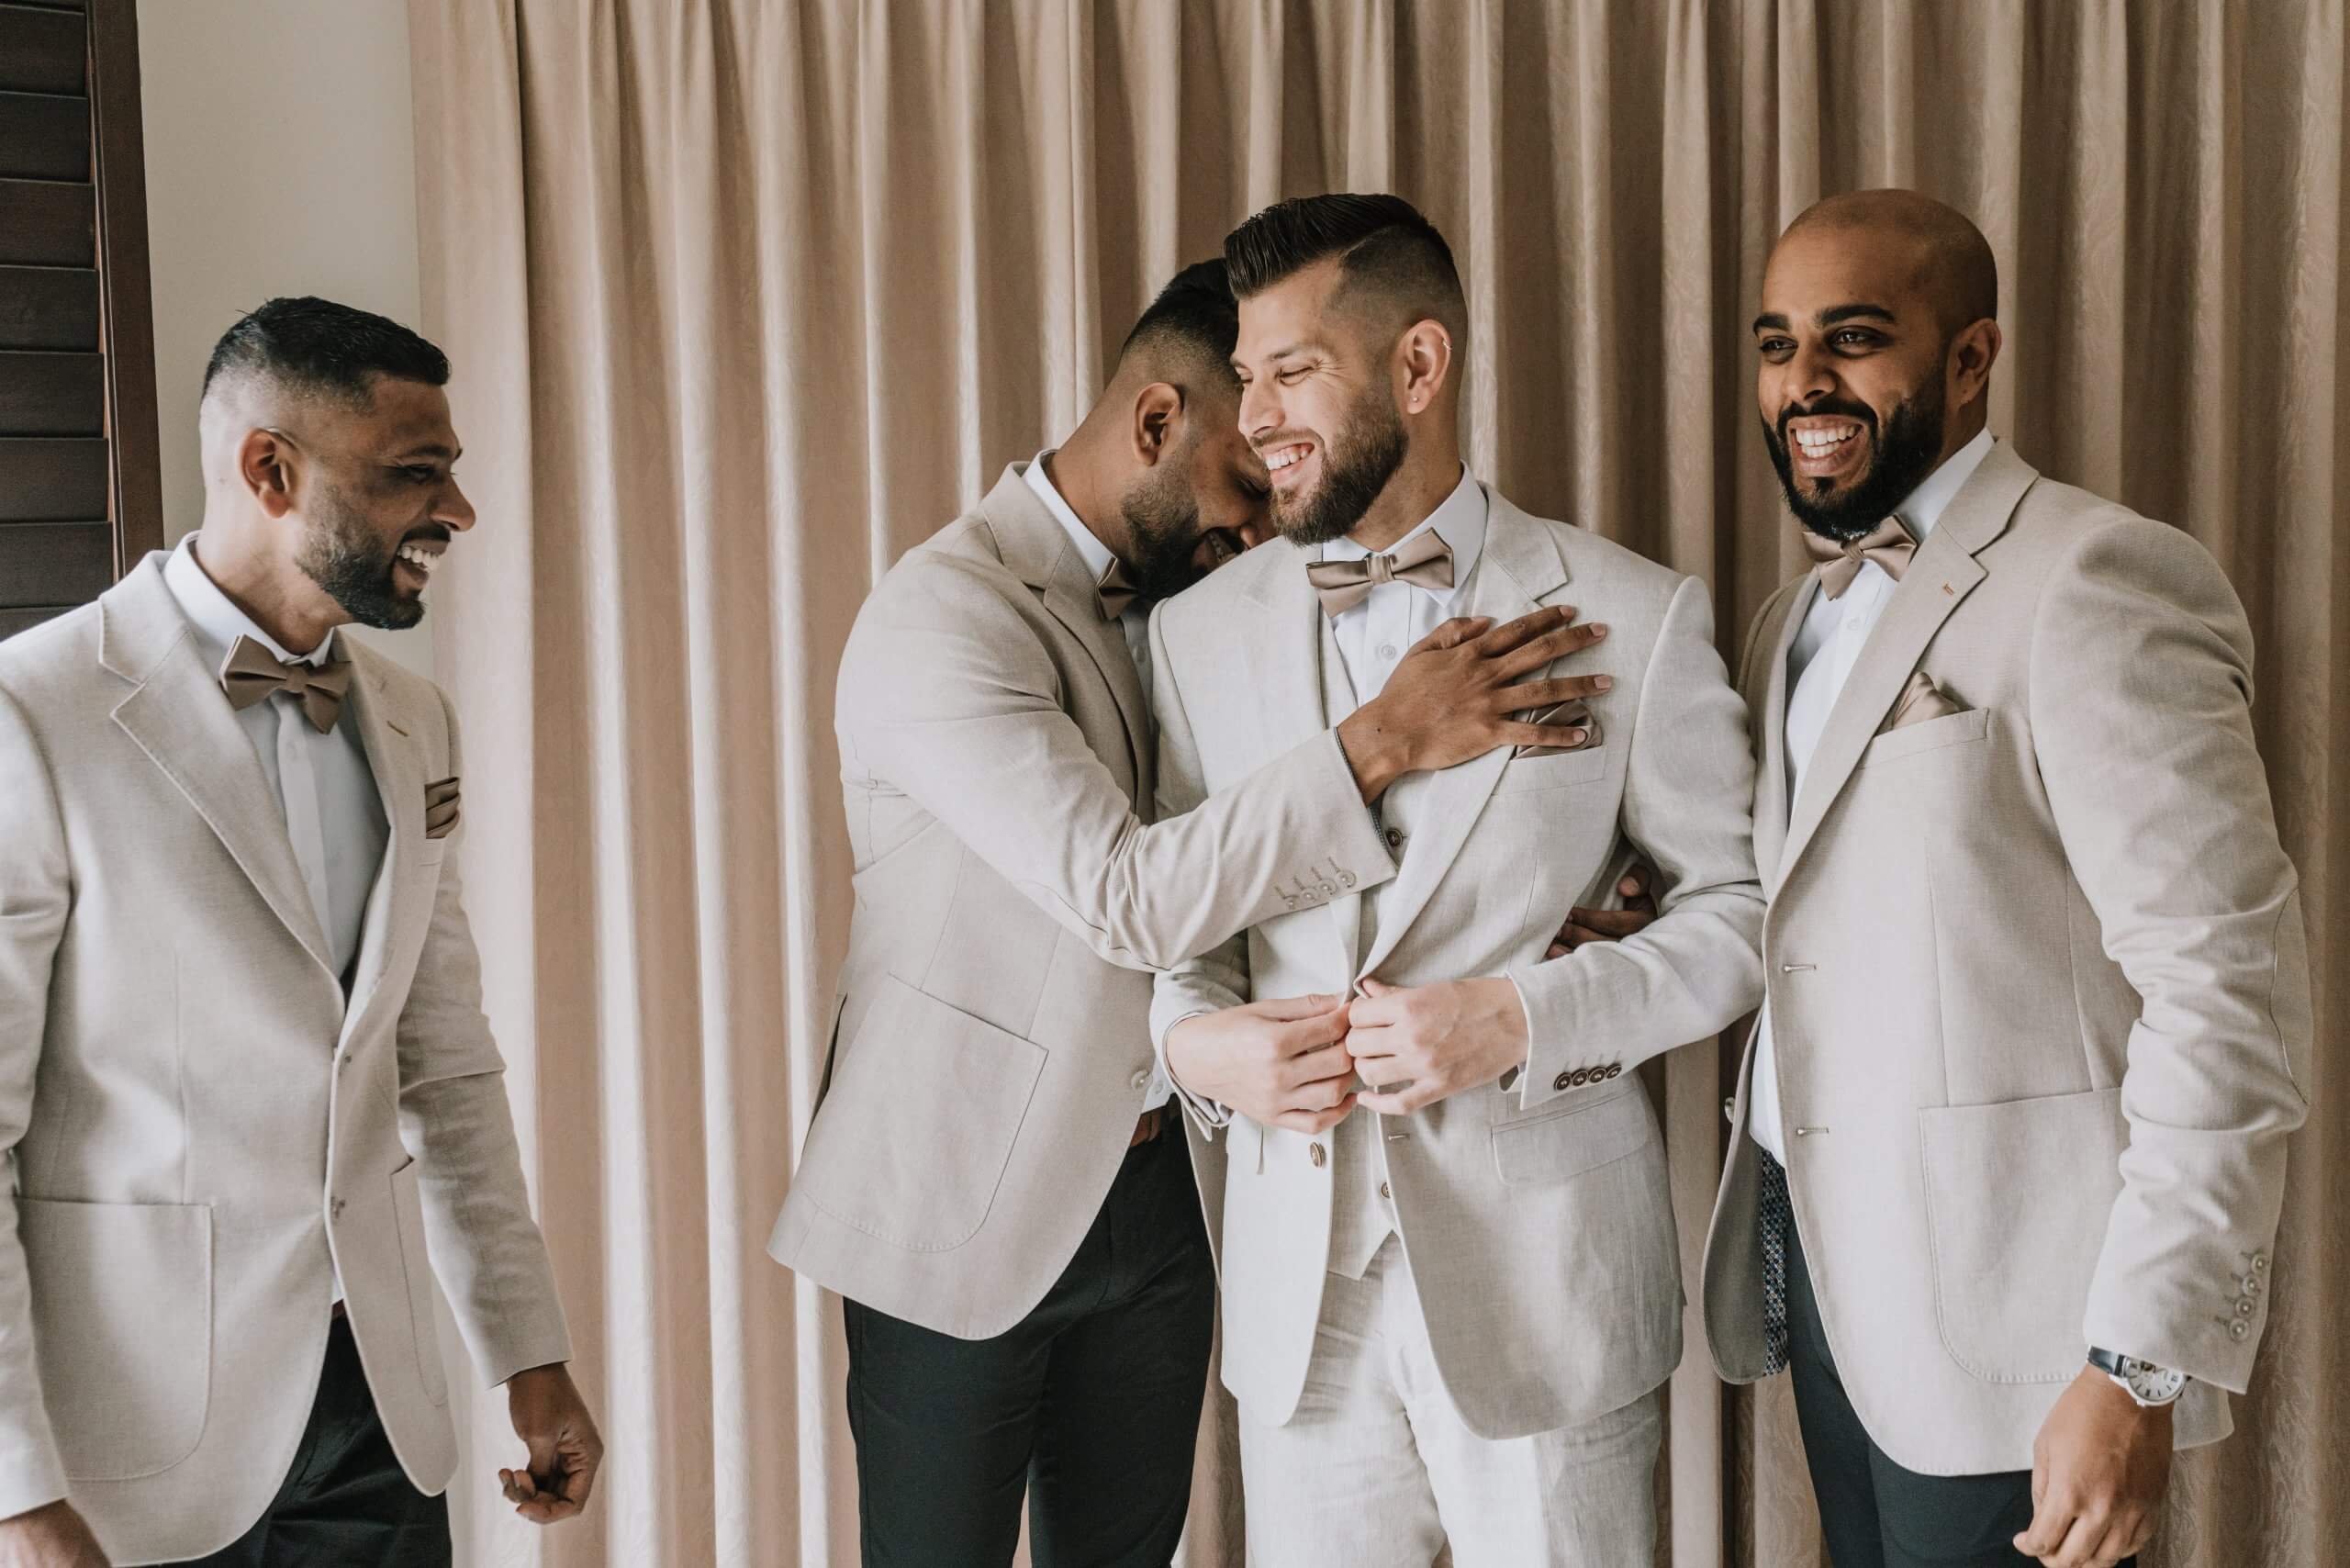 A photo showing the closeness of the groom and his groomsmen as they are having fun during the groom's get ready session.